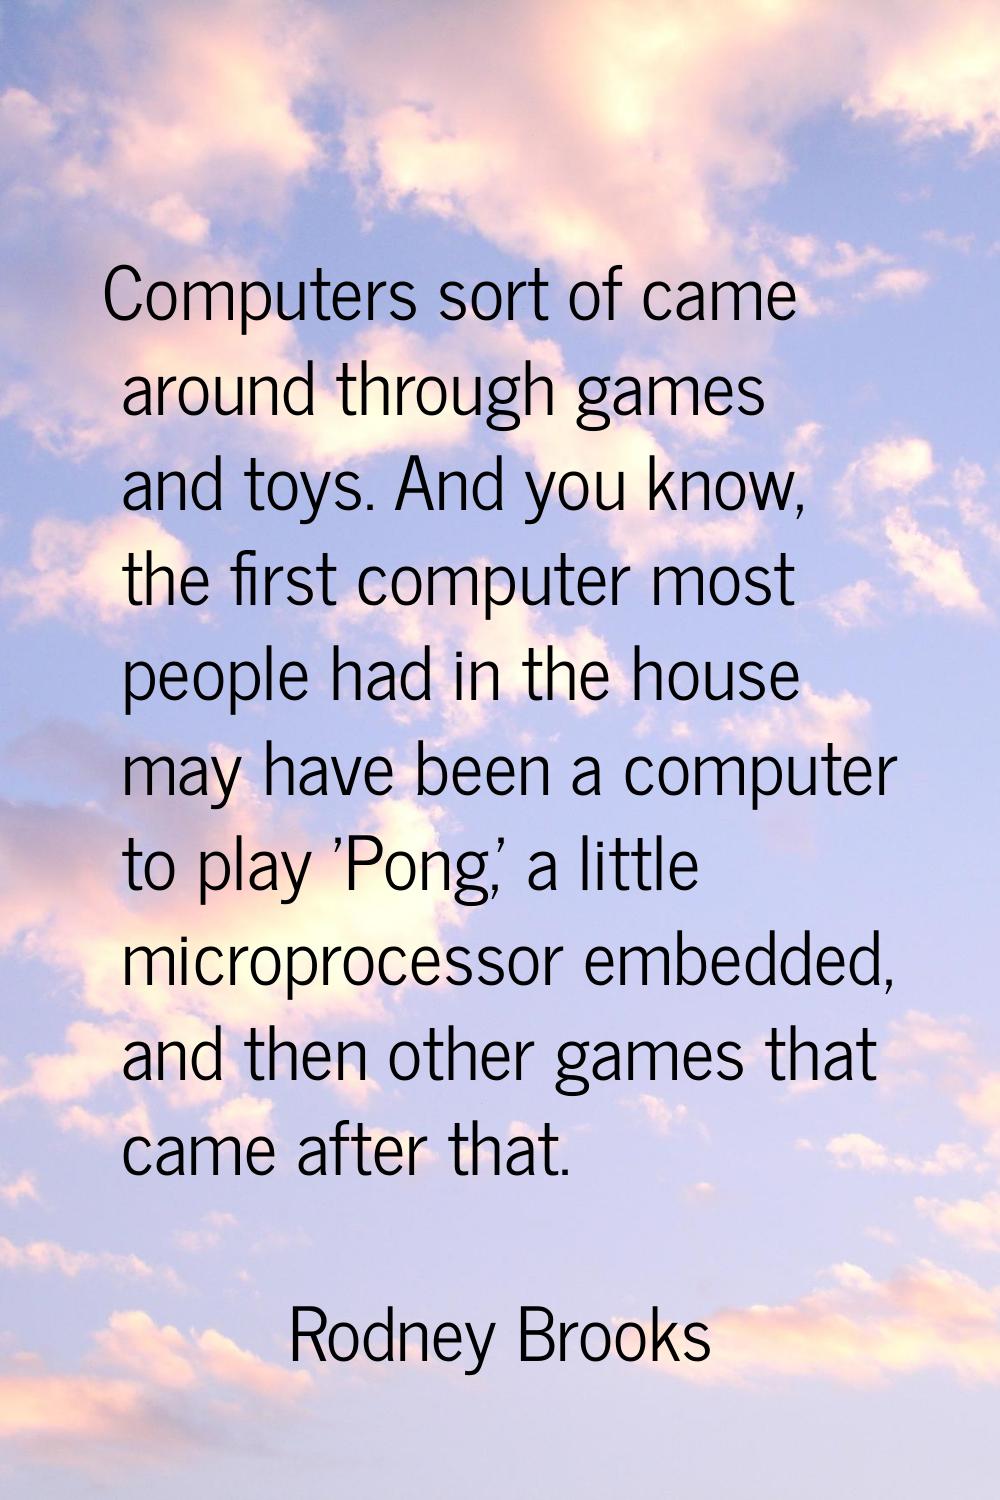 Computers sort of came around through games and toys. And you know, the first computer most people 